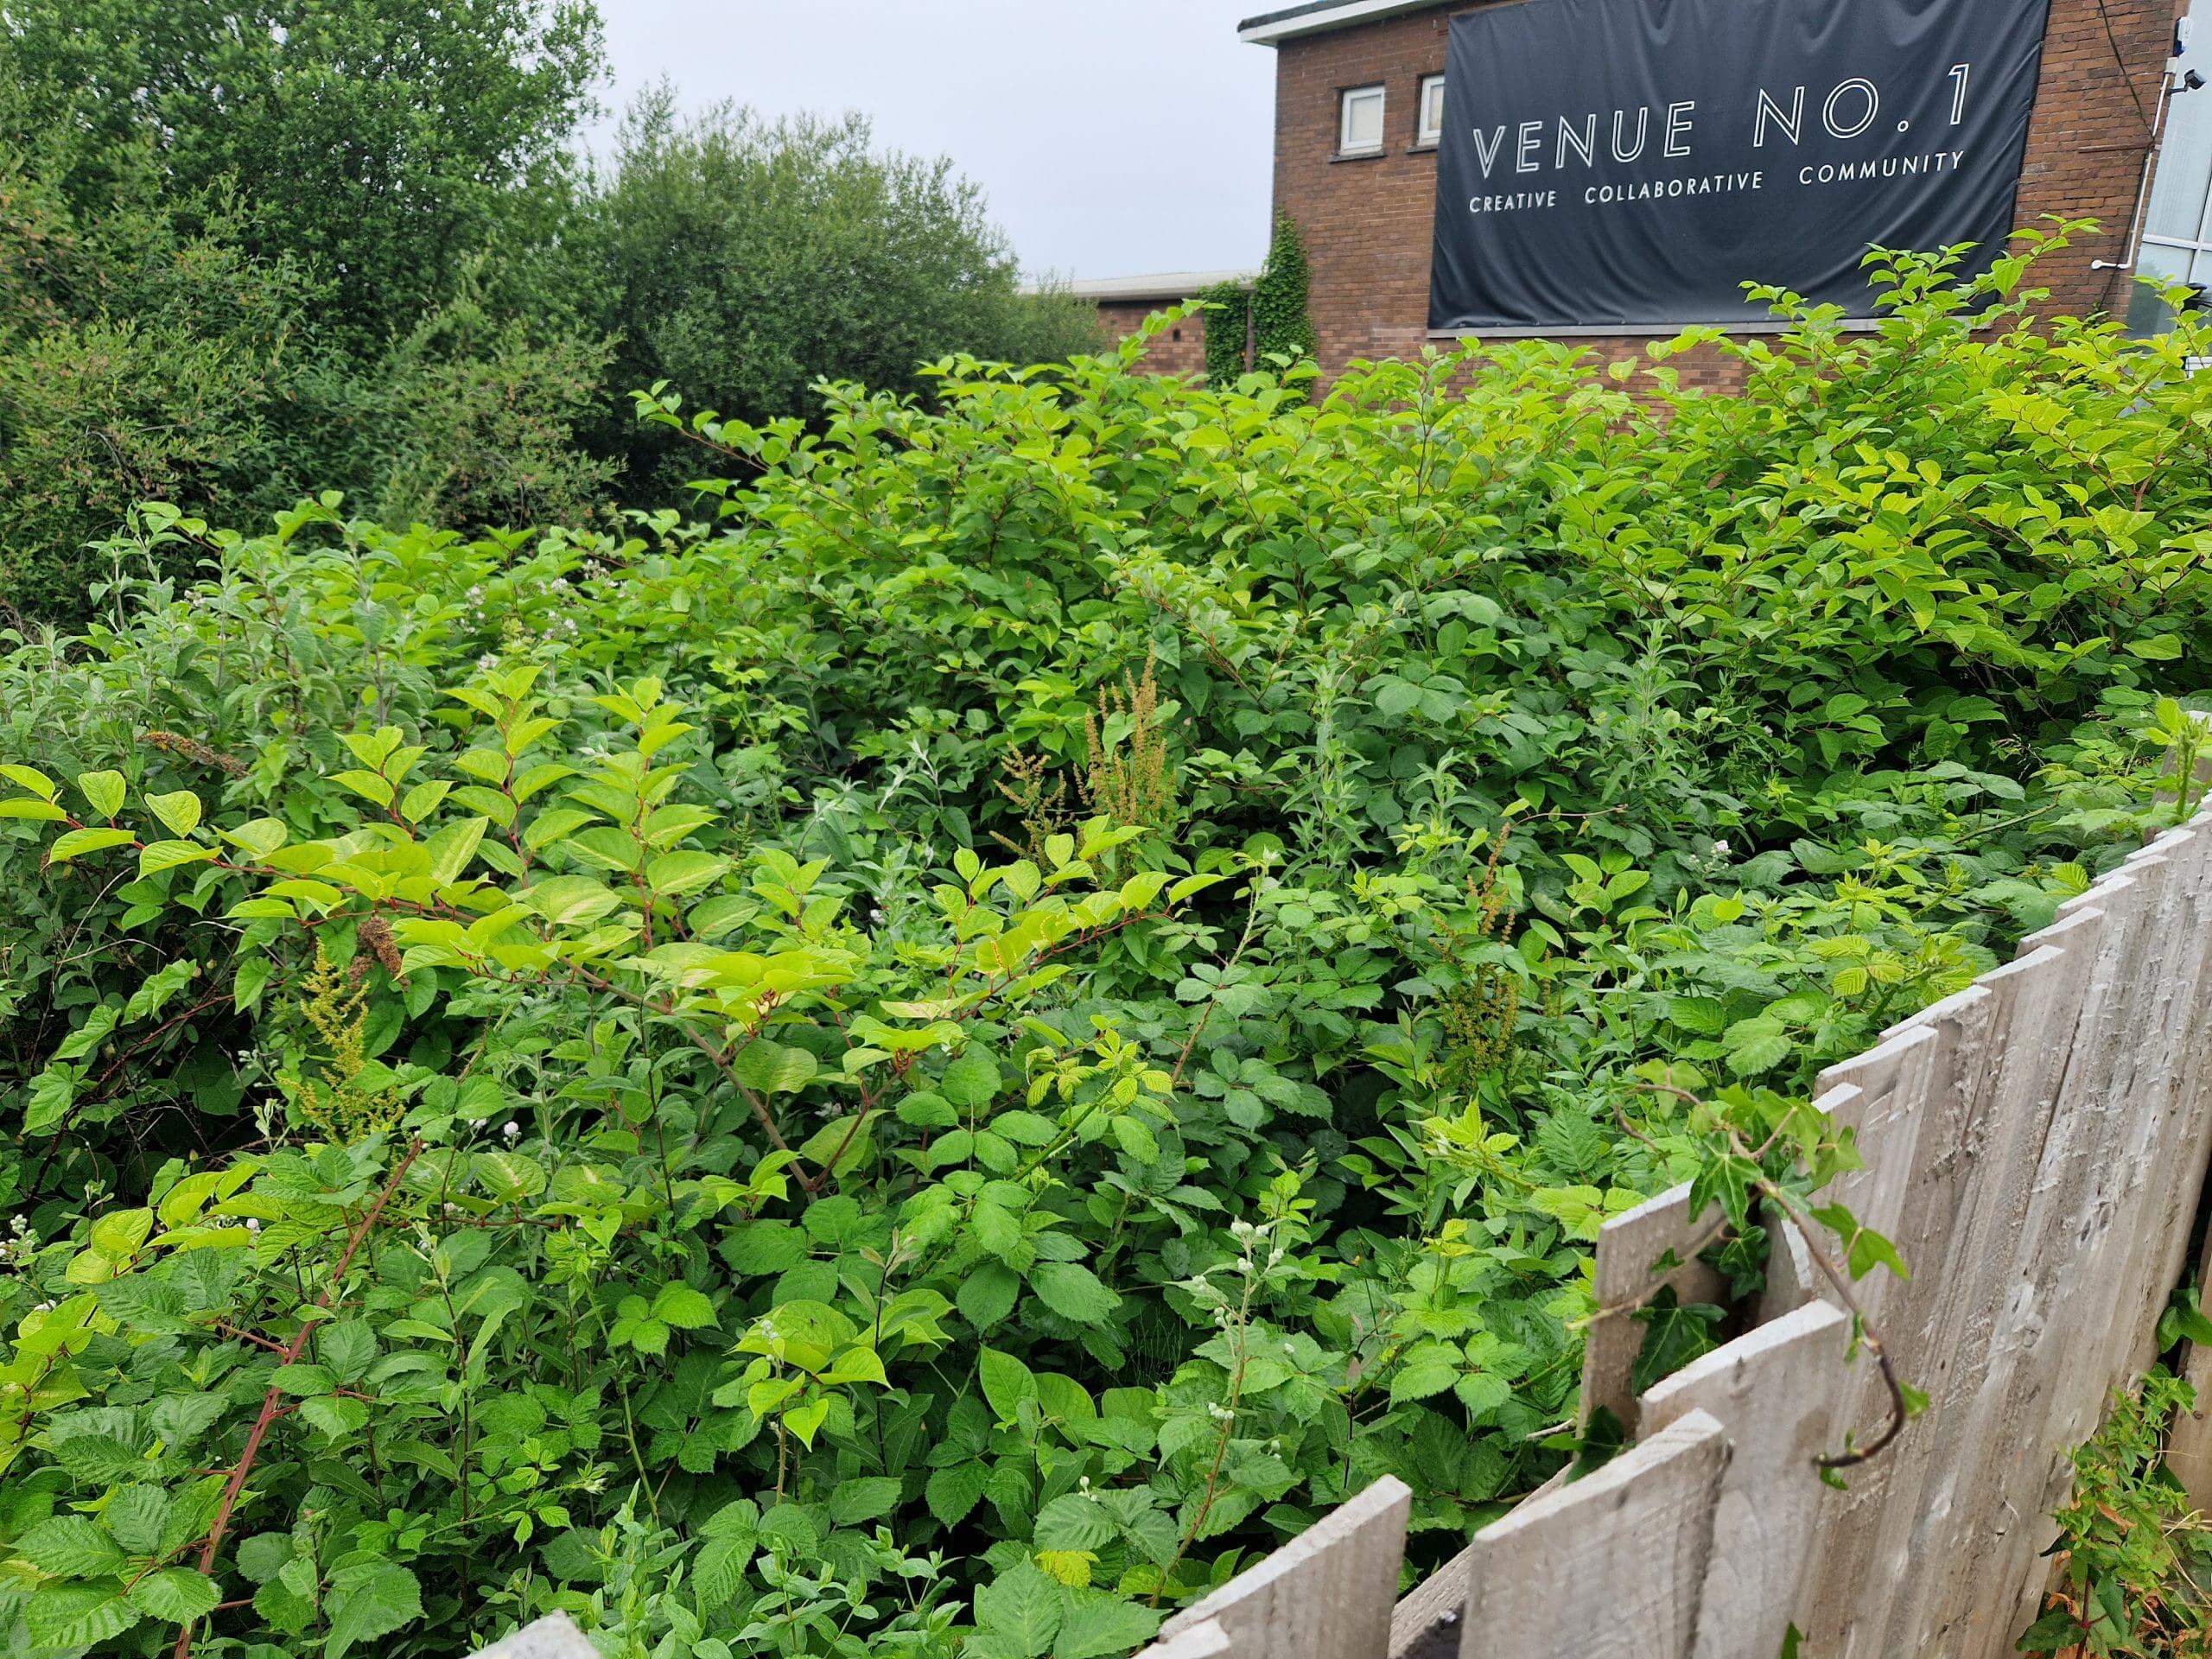 Controlling Japanese knotweed requires time and patience to get the result you desire